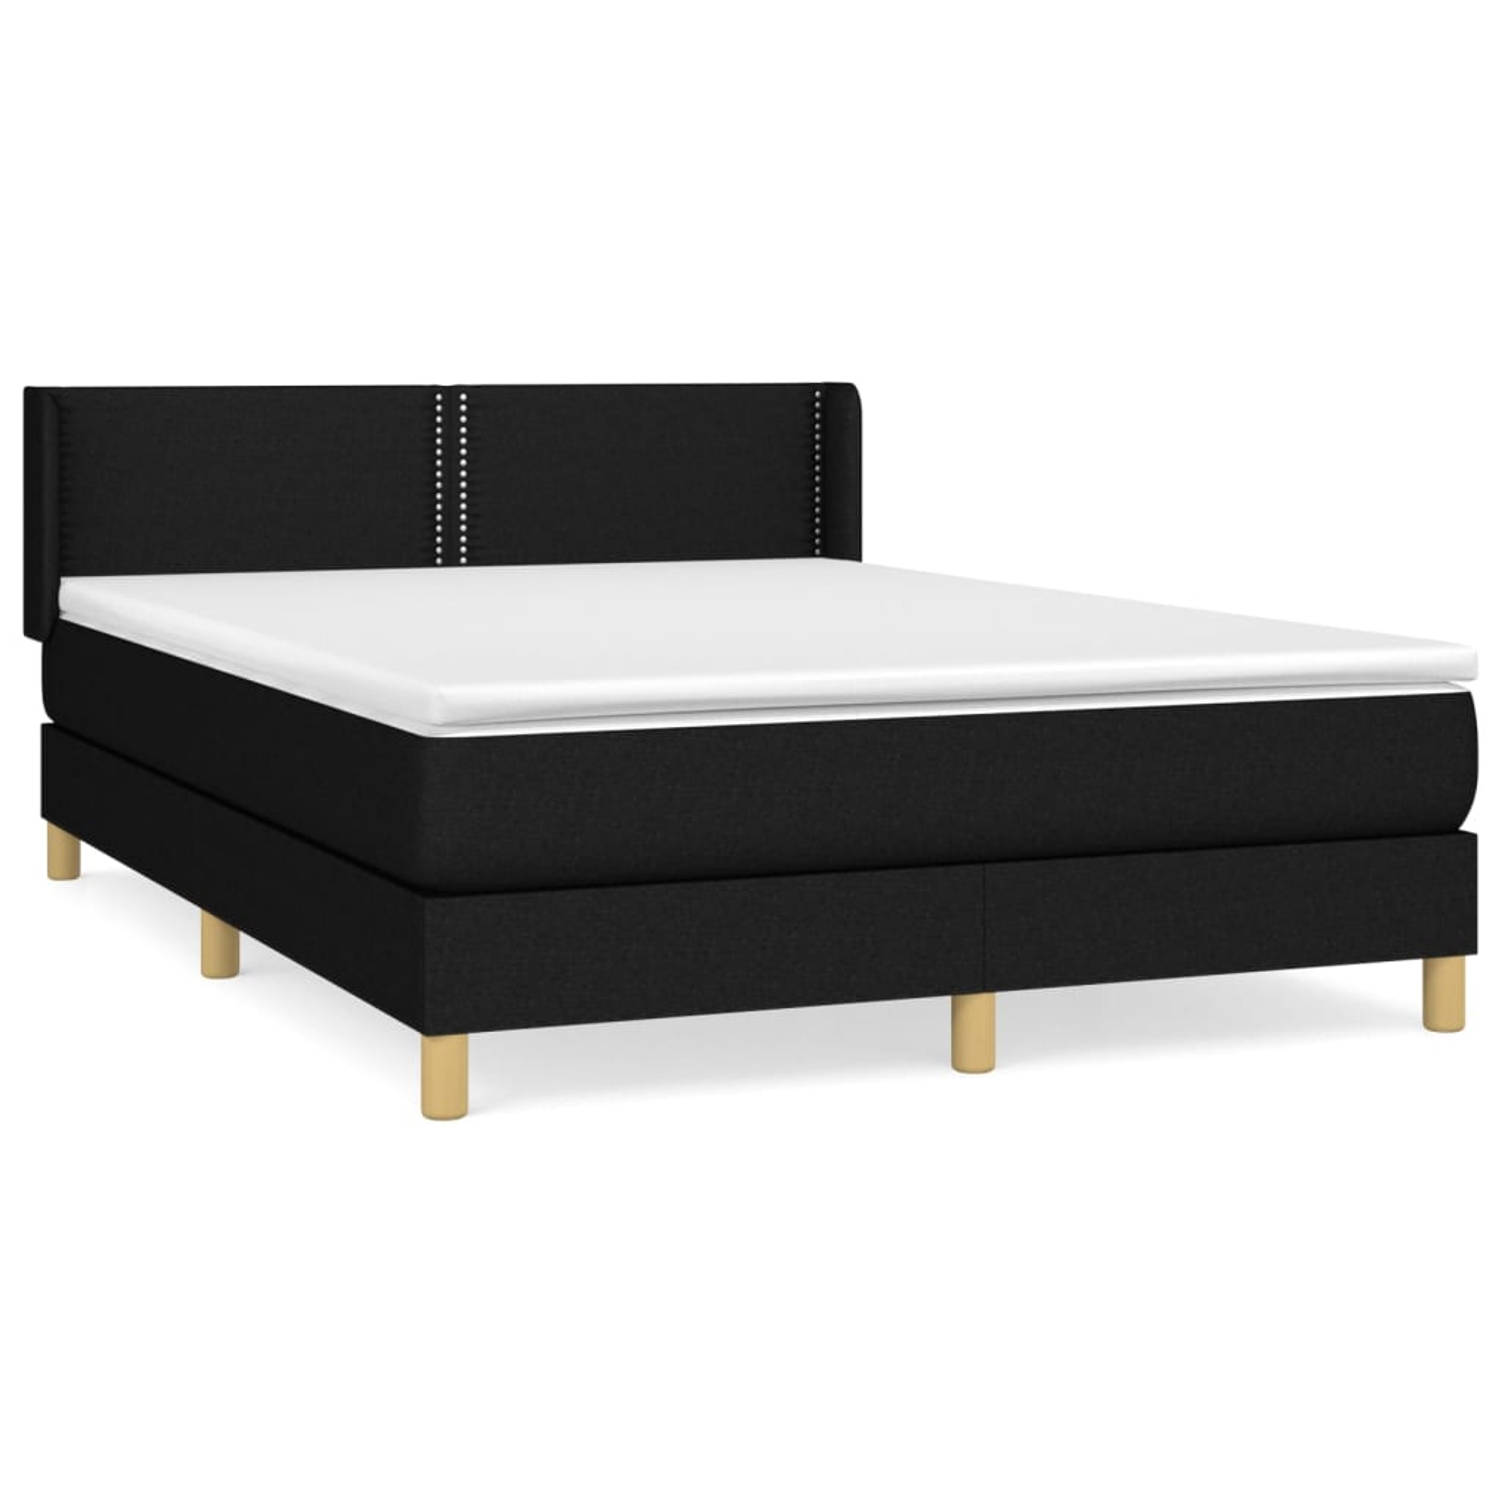 The Living Store Boxspringbed - Comfort - Bed - Matras - 140 x 190 cm - Luxe slaapcomfort